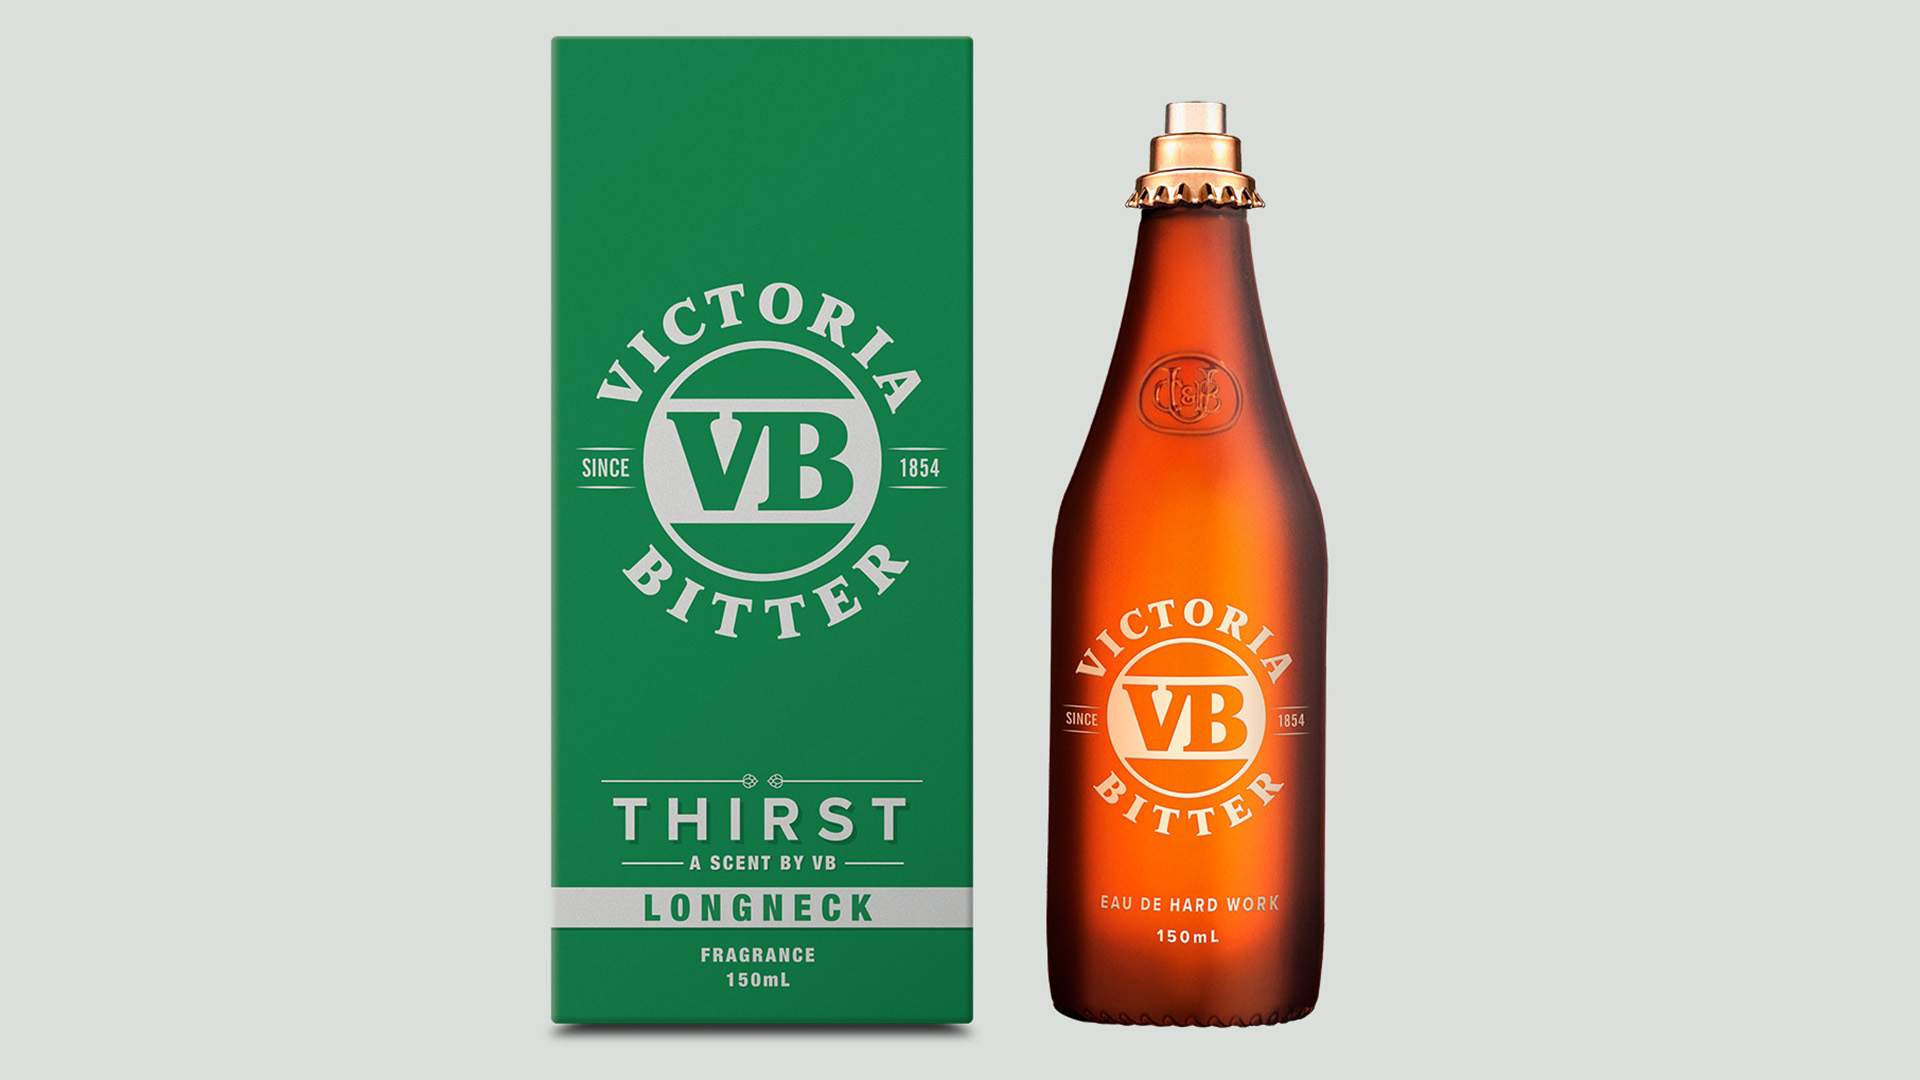 Victoria Bitter Has Just Released a Longneck Version of Its Hops-Scented Fragrance